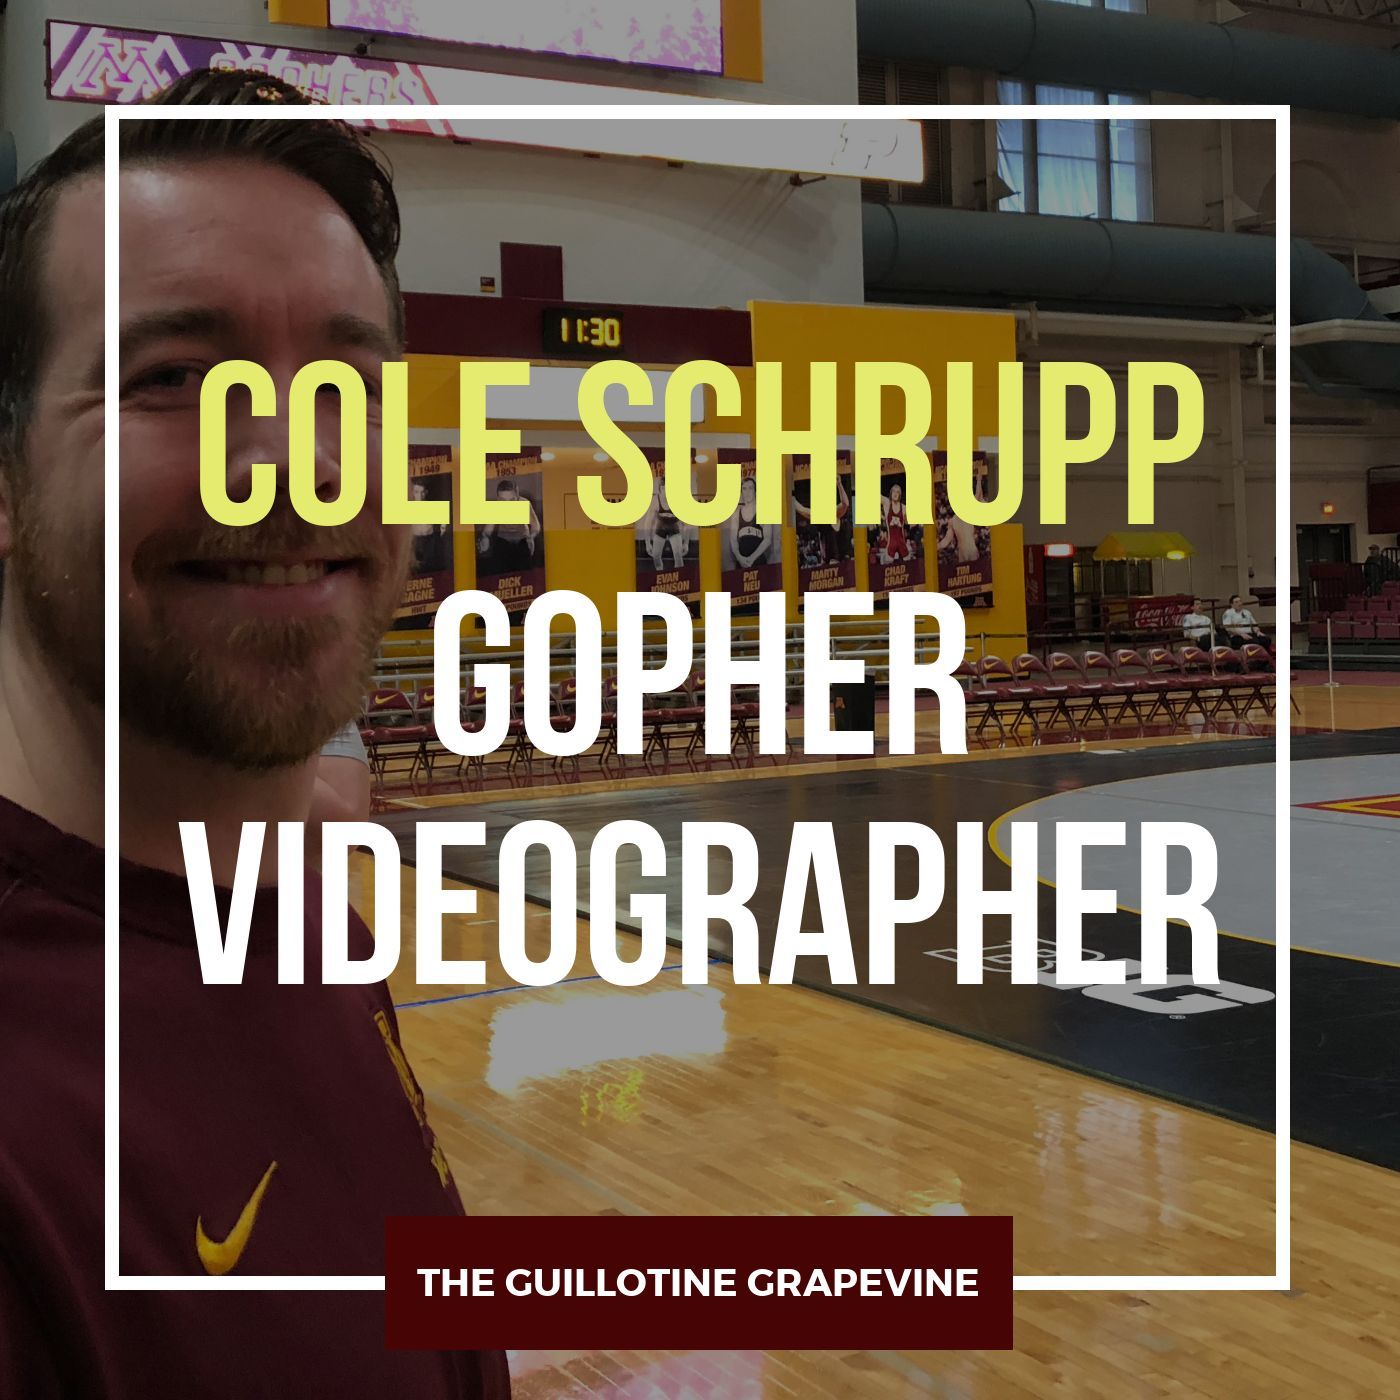 Cole Schrupp provides powerful and popular videos for Gopher wrestling - GG53